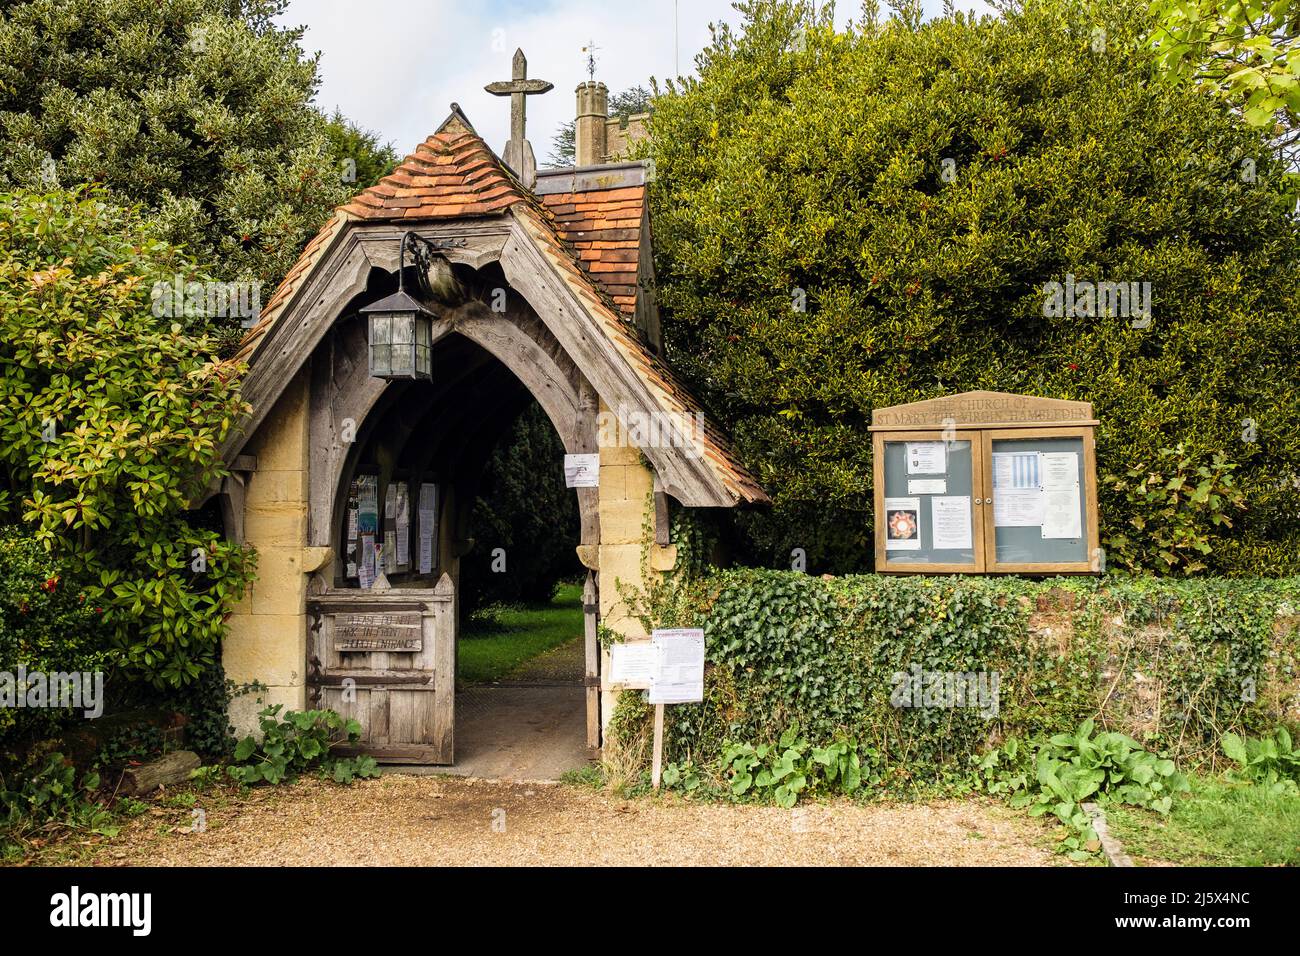 St Mary the Virgin Church Lychgate and notice board in Chilterns village of Hambleden, Buckinghamshire, England, UK, Britain Stock Photo